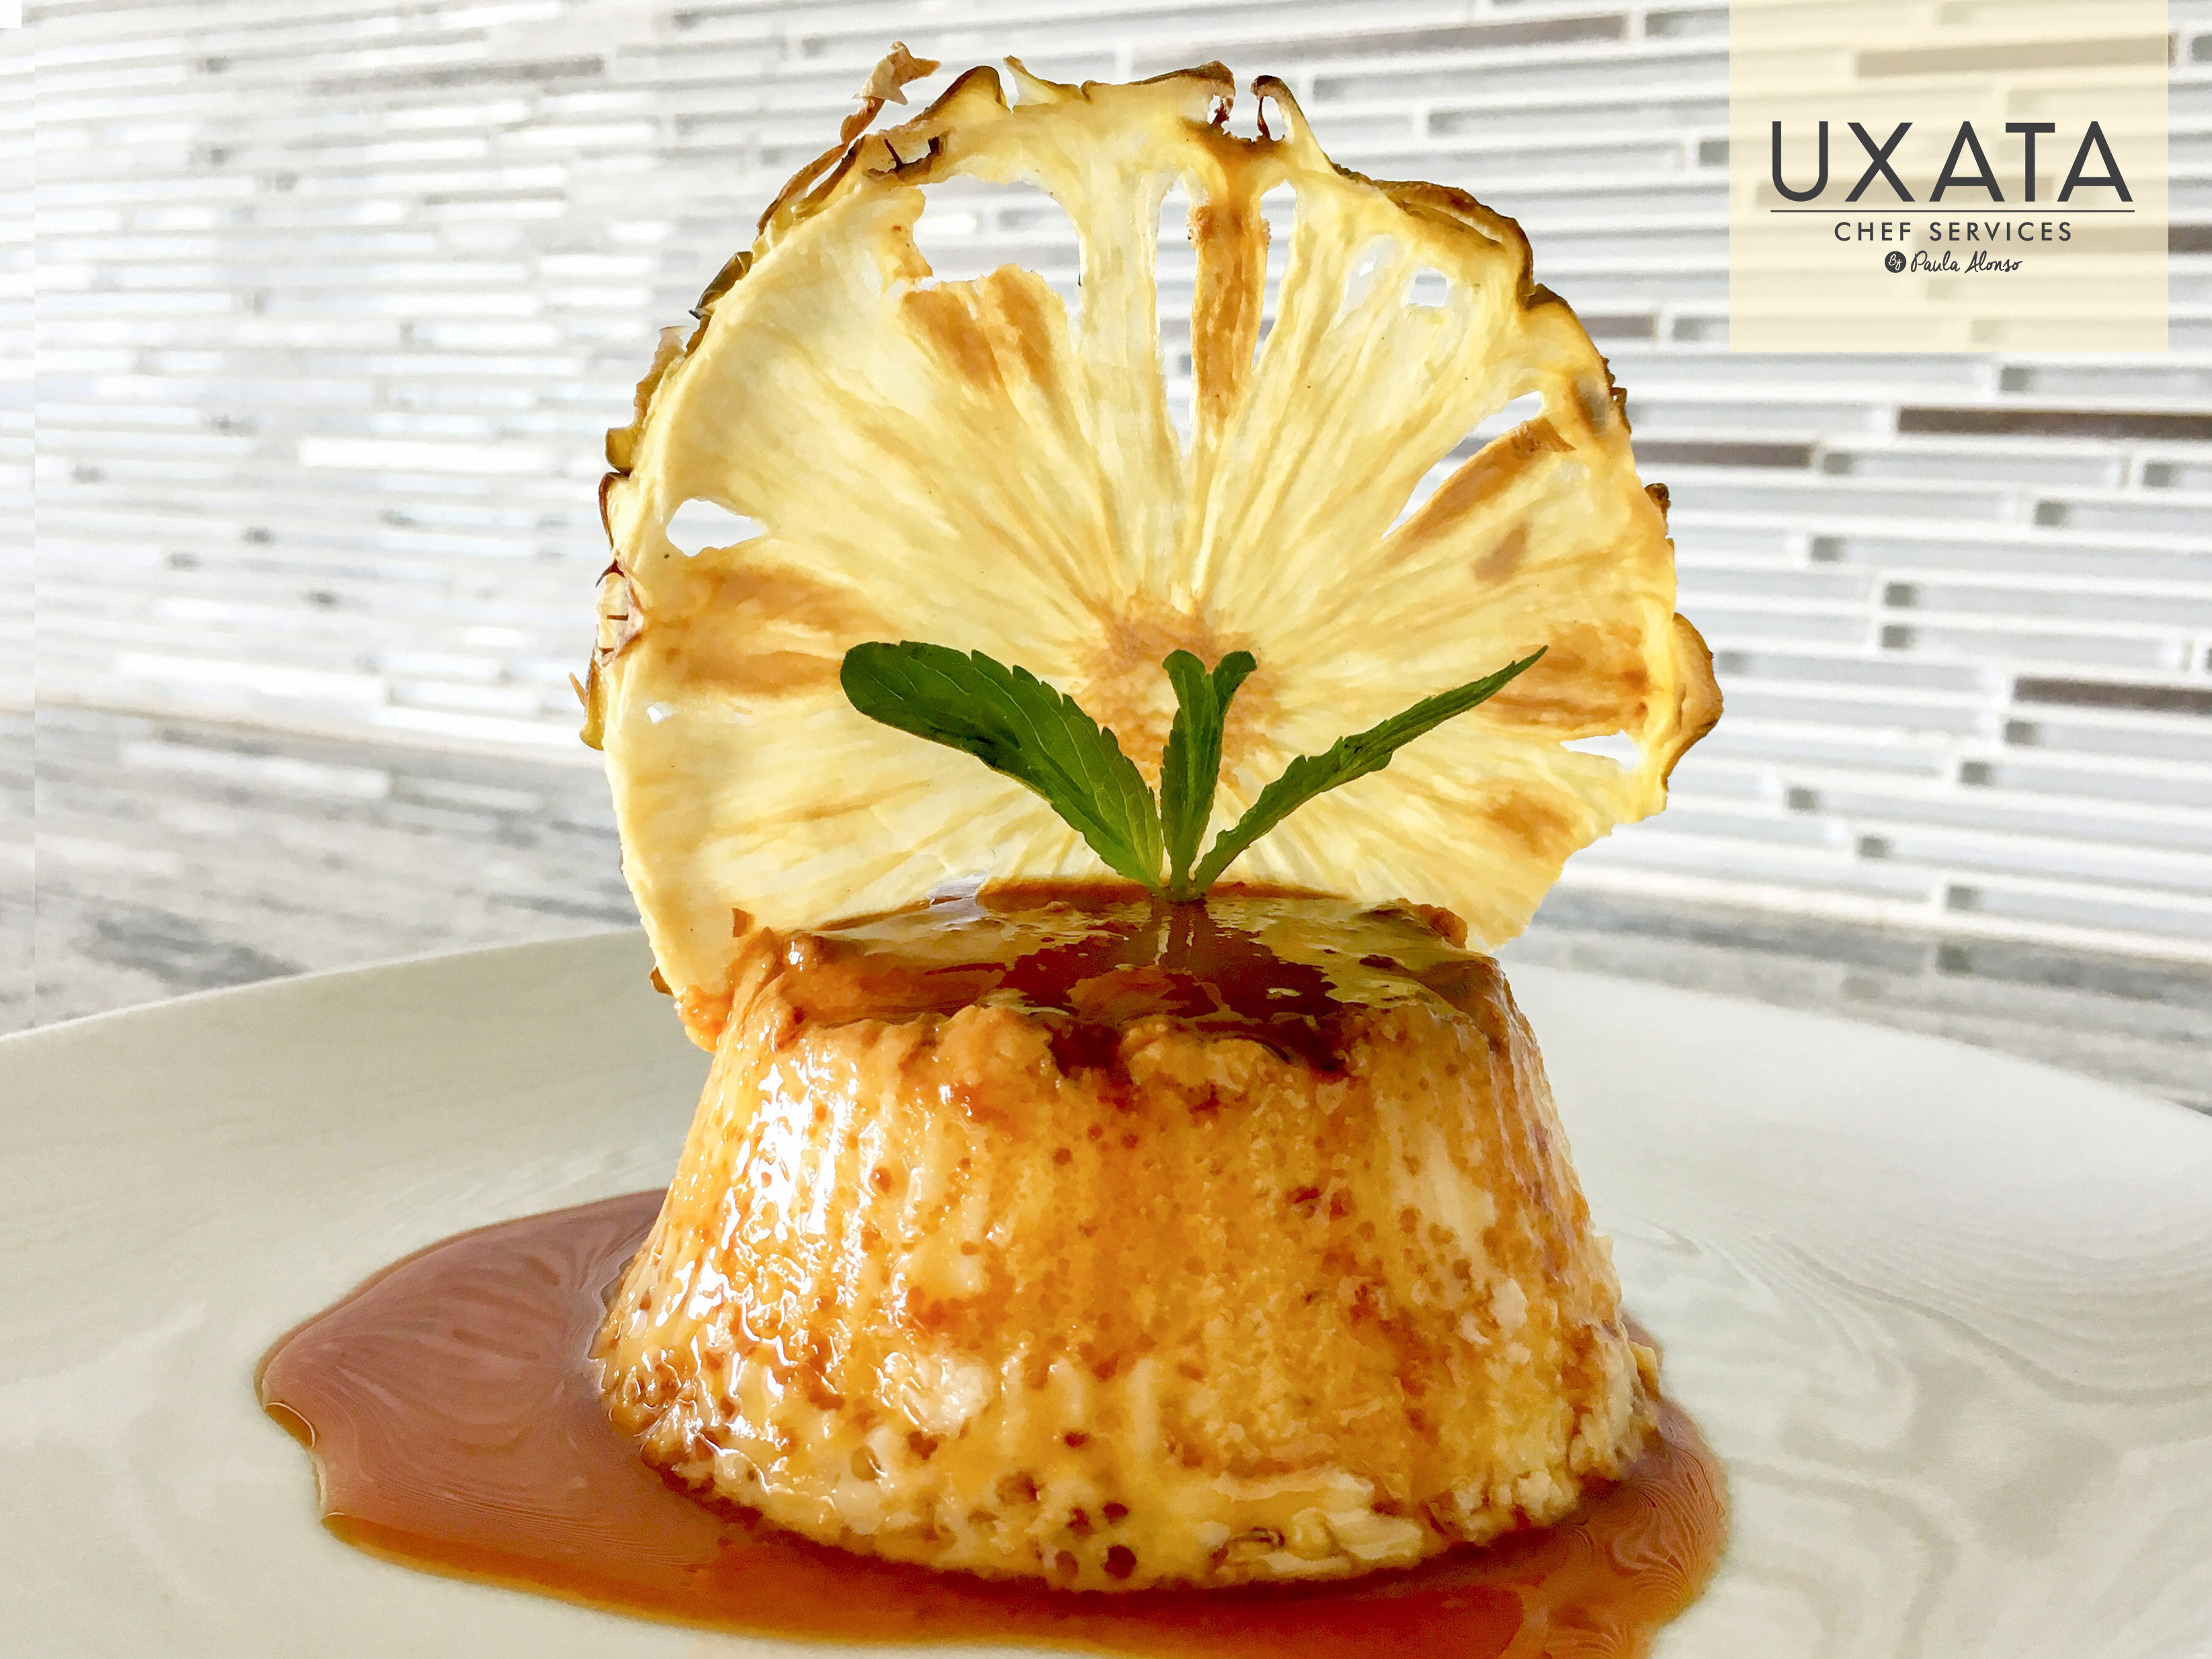 Presentation of individual caramel custard with decoration of caramelized sugar and mint leaves, by UXATA Private Chef Services, Playa del Carmen.